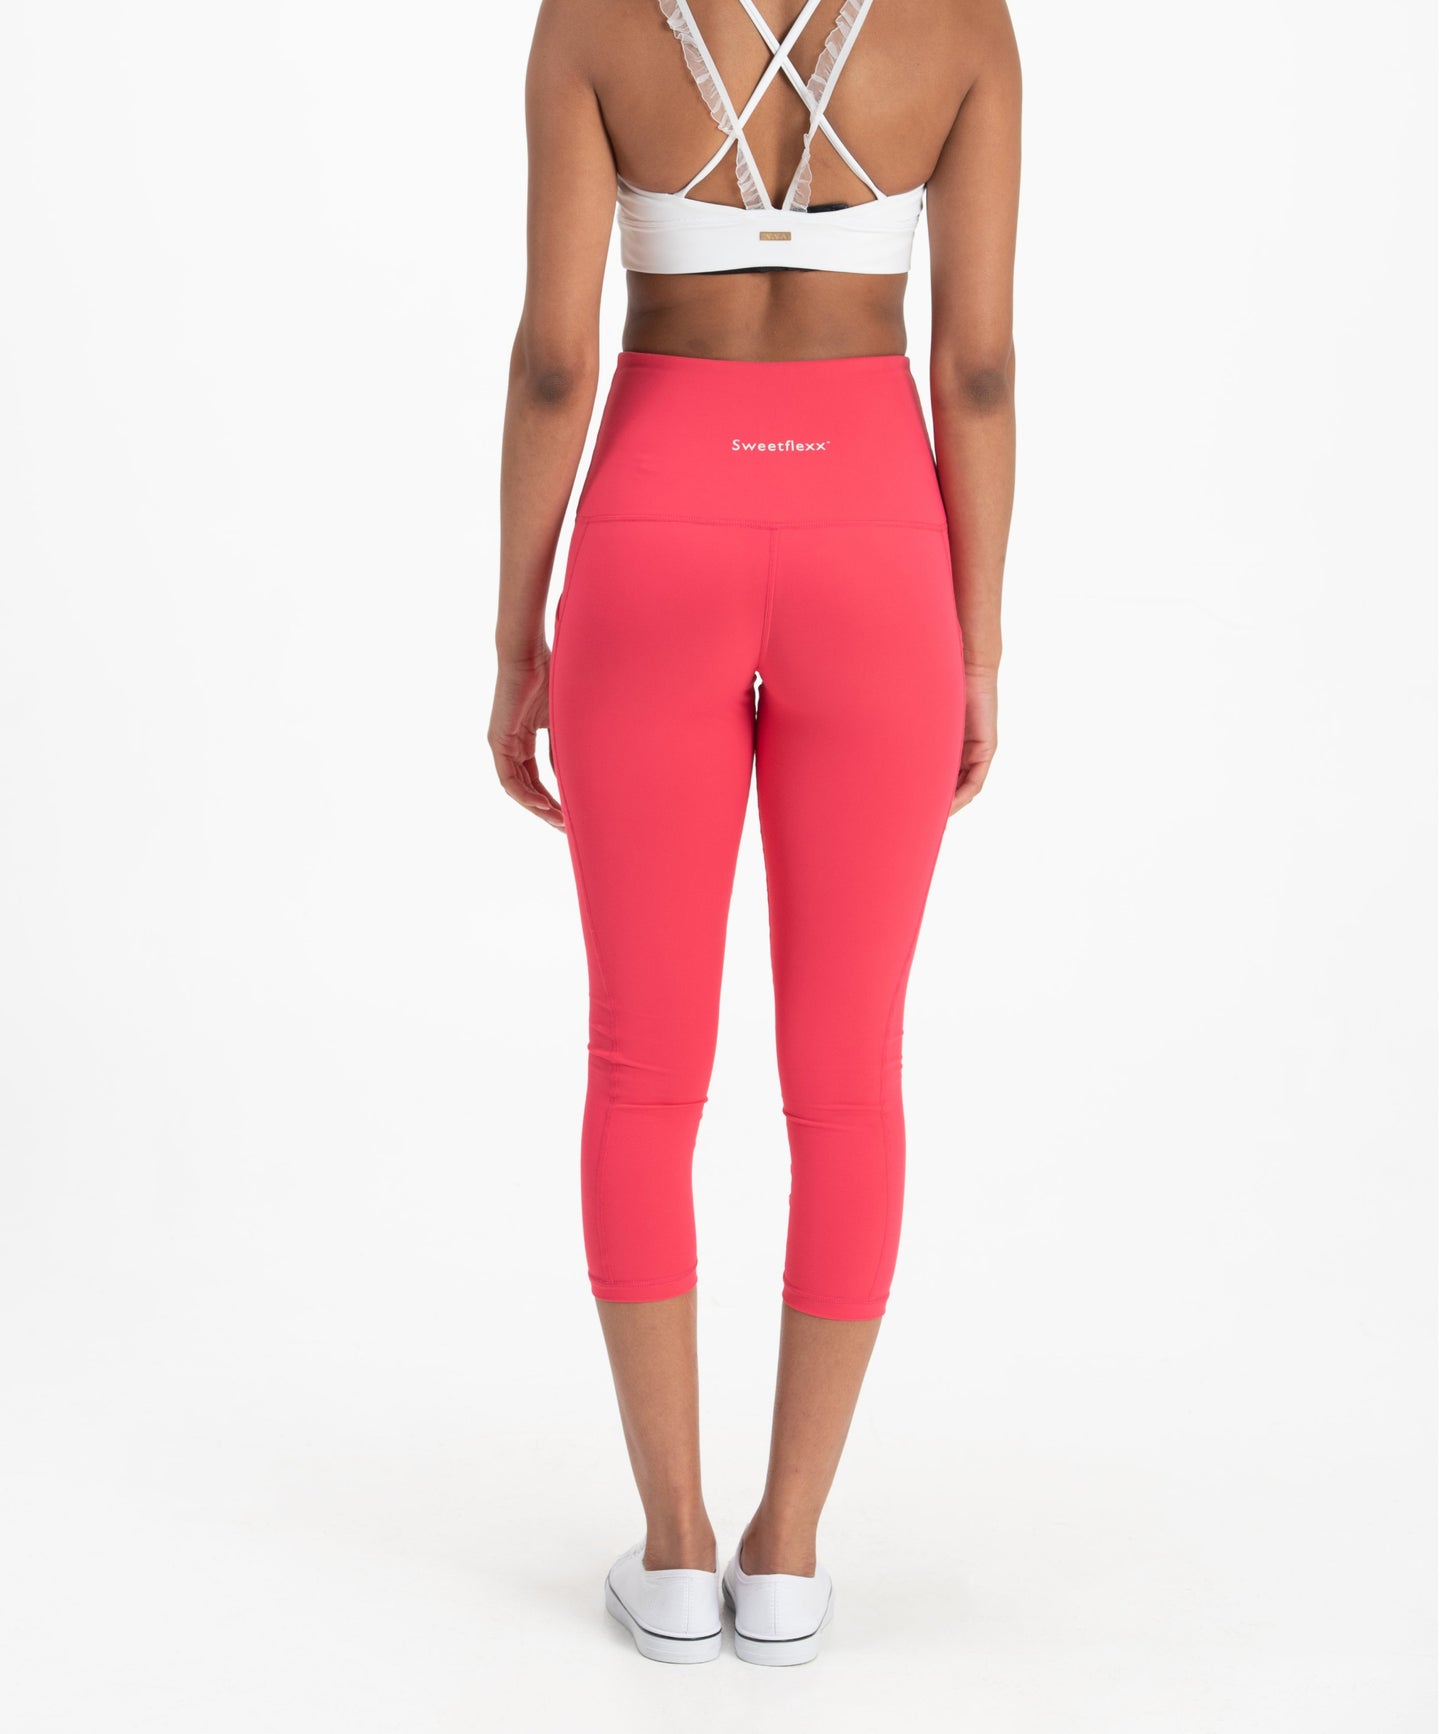 Sweetflexx Resistance Leggings Review - Doused in Pink